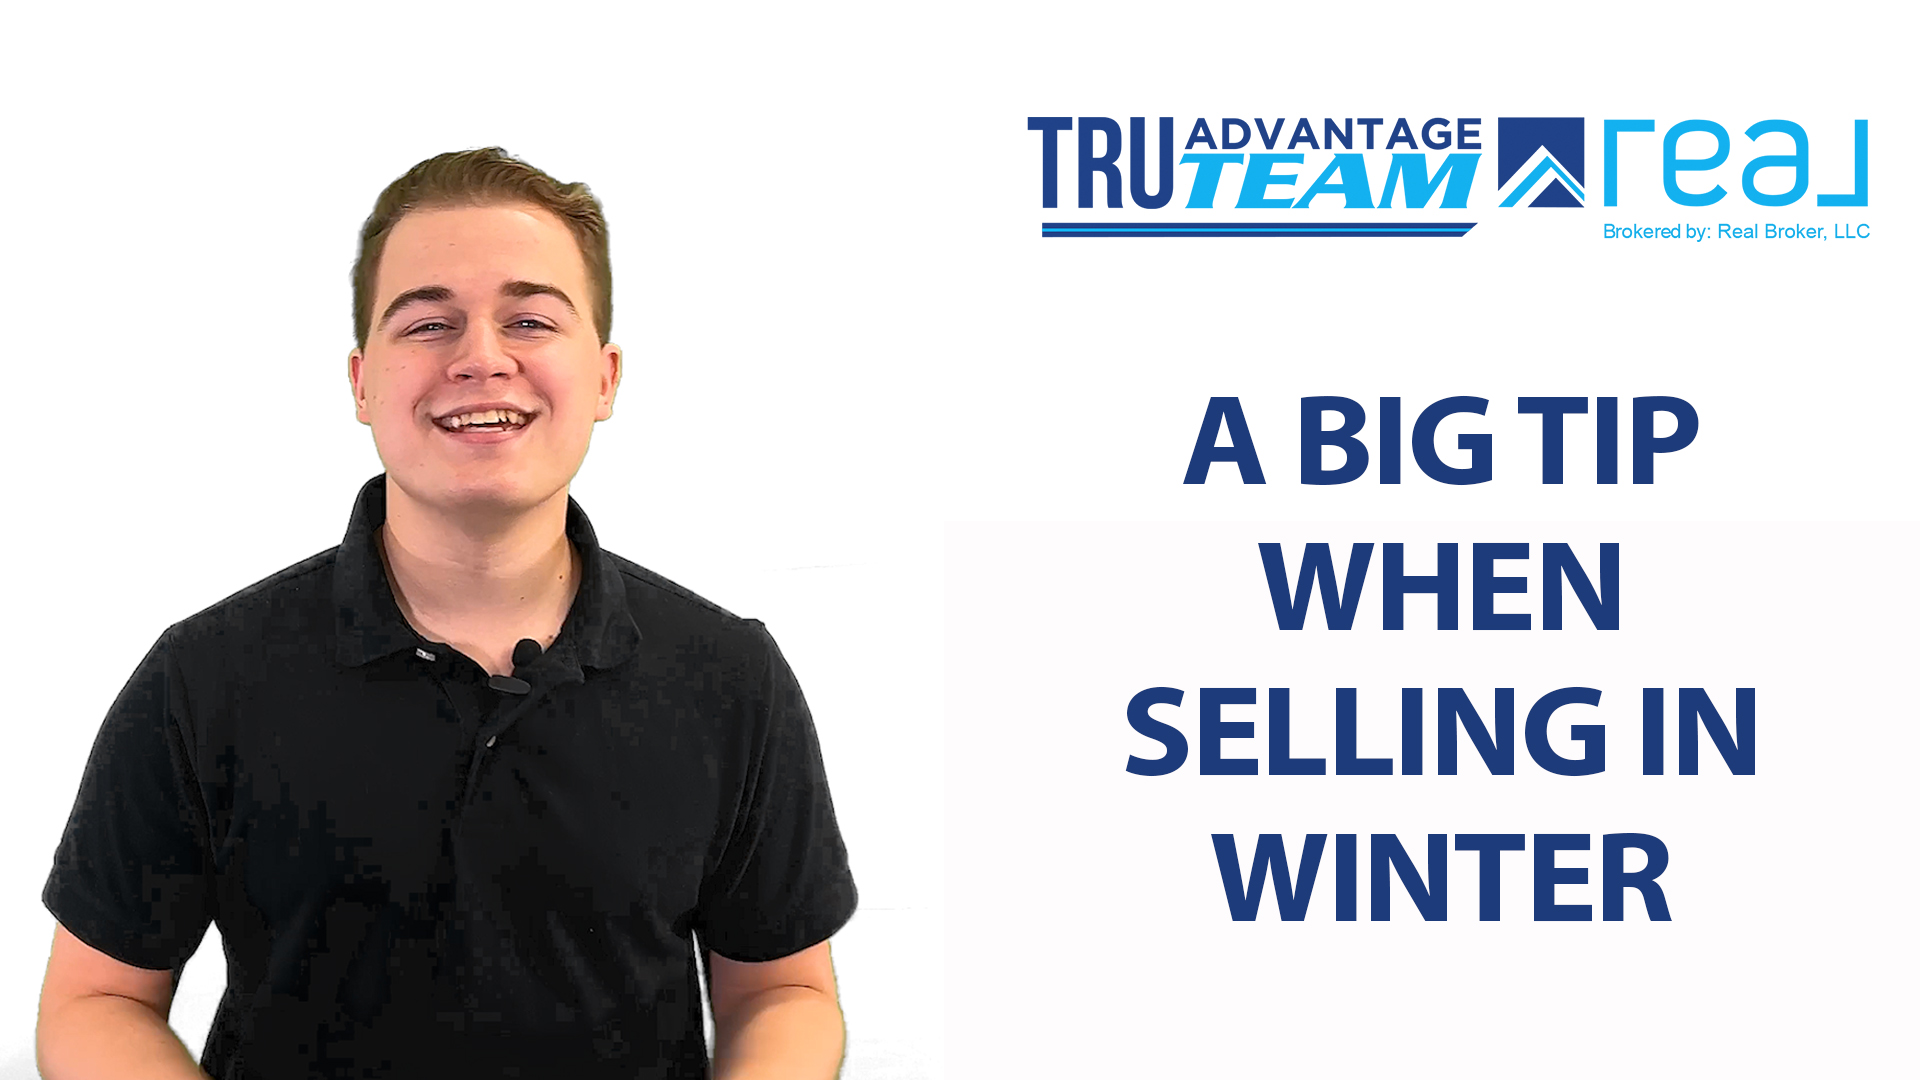 How We Help You Sell in the Winter